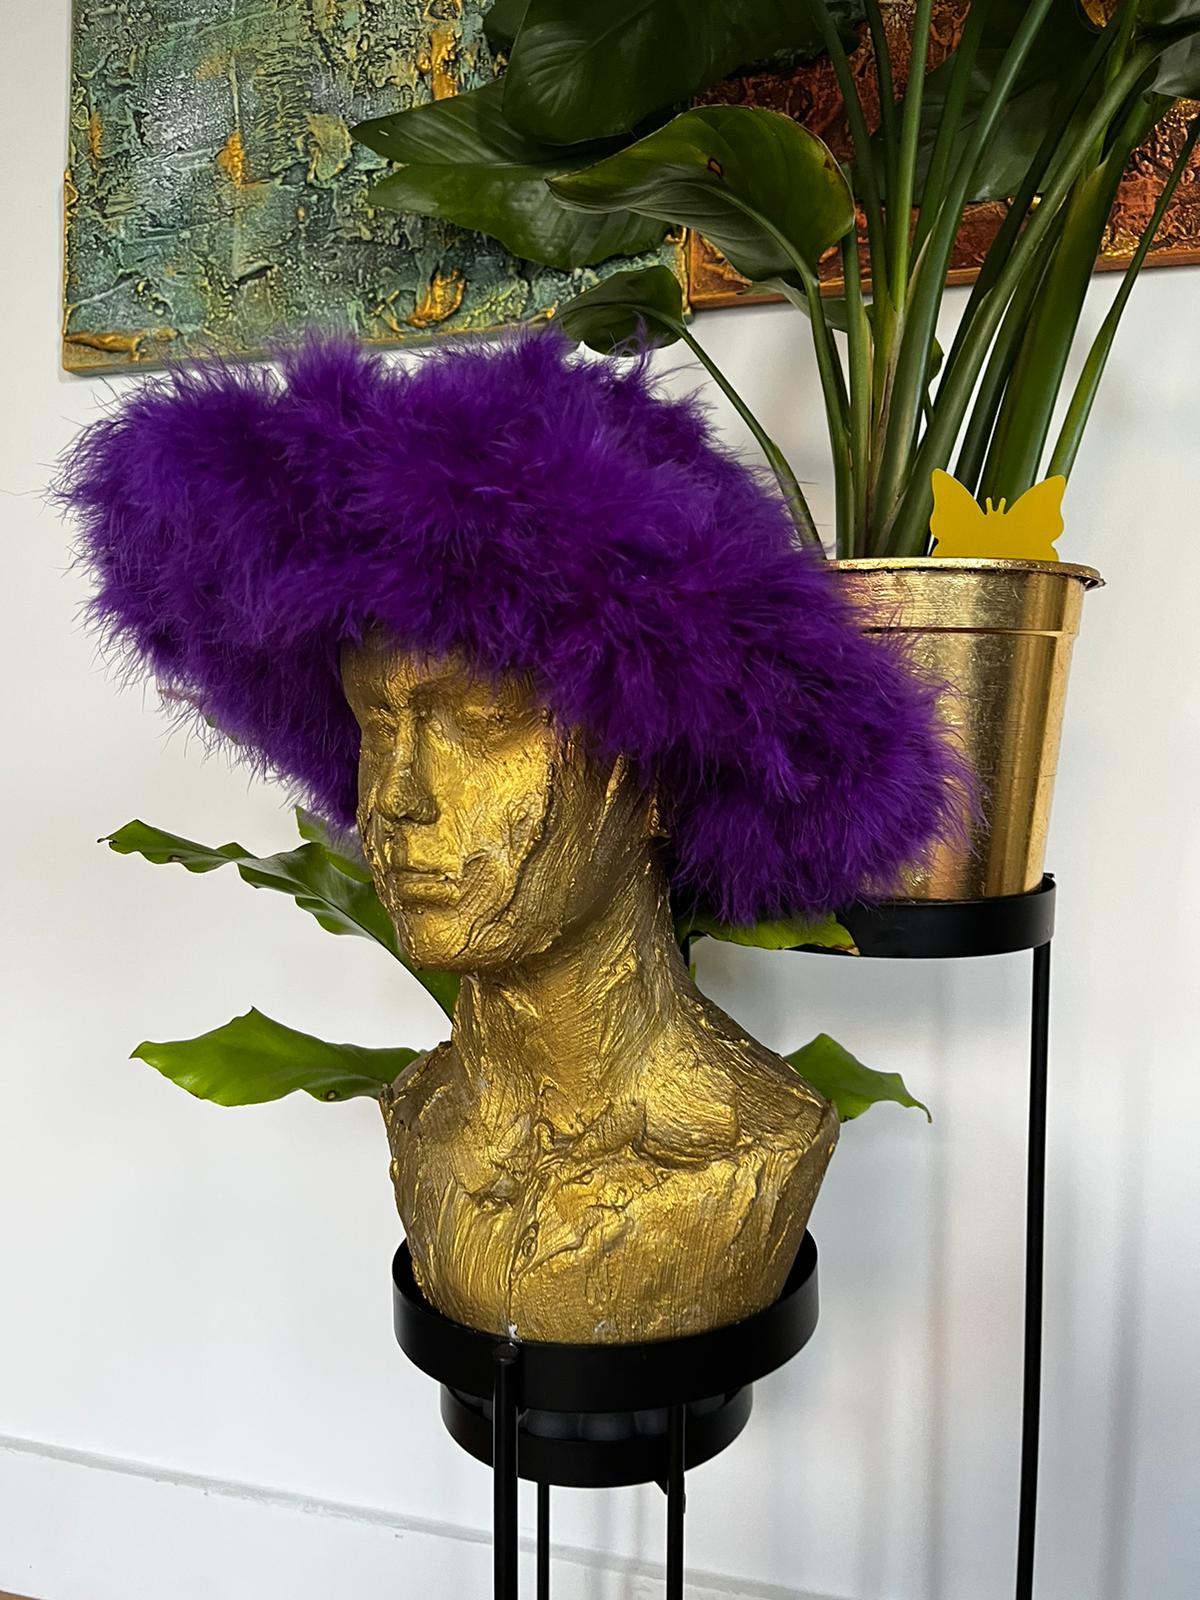 The 'Reign' Purple Fluffy Marabou Feather Hat